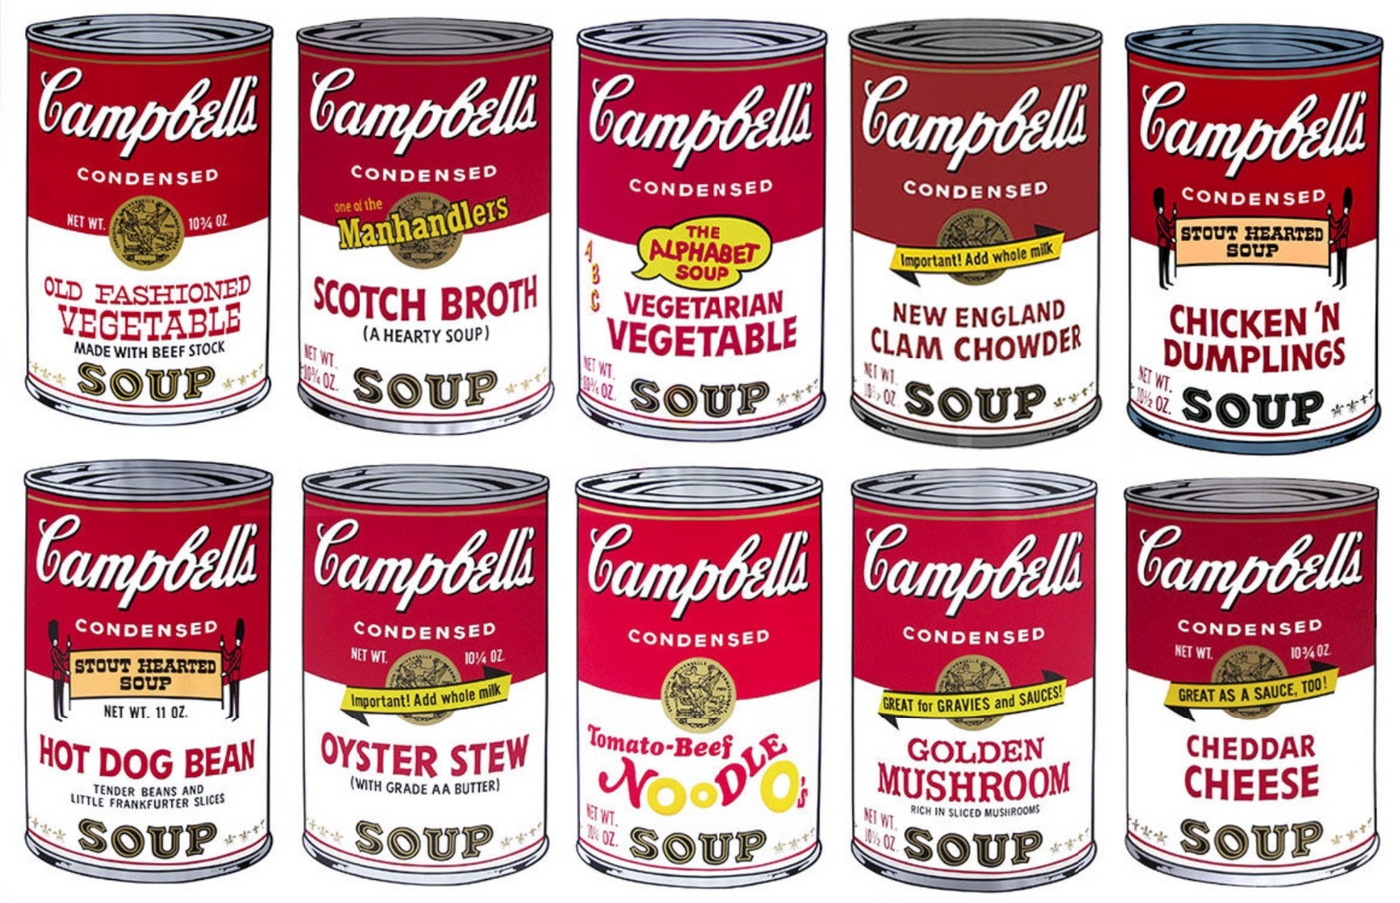 Sunday B. Morning (after Andy Warhol) Campbell's Soup II